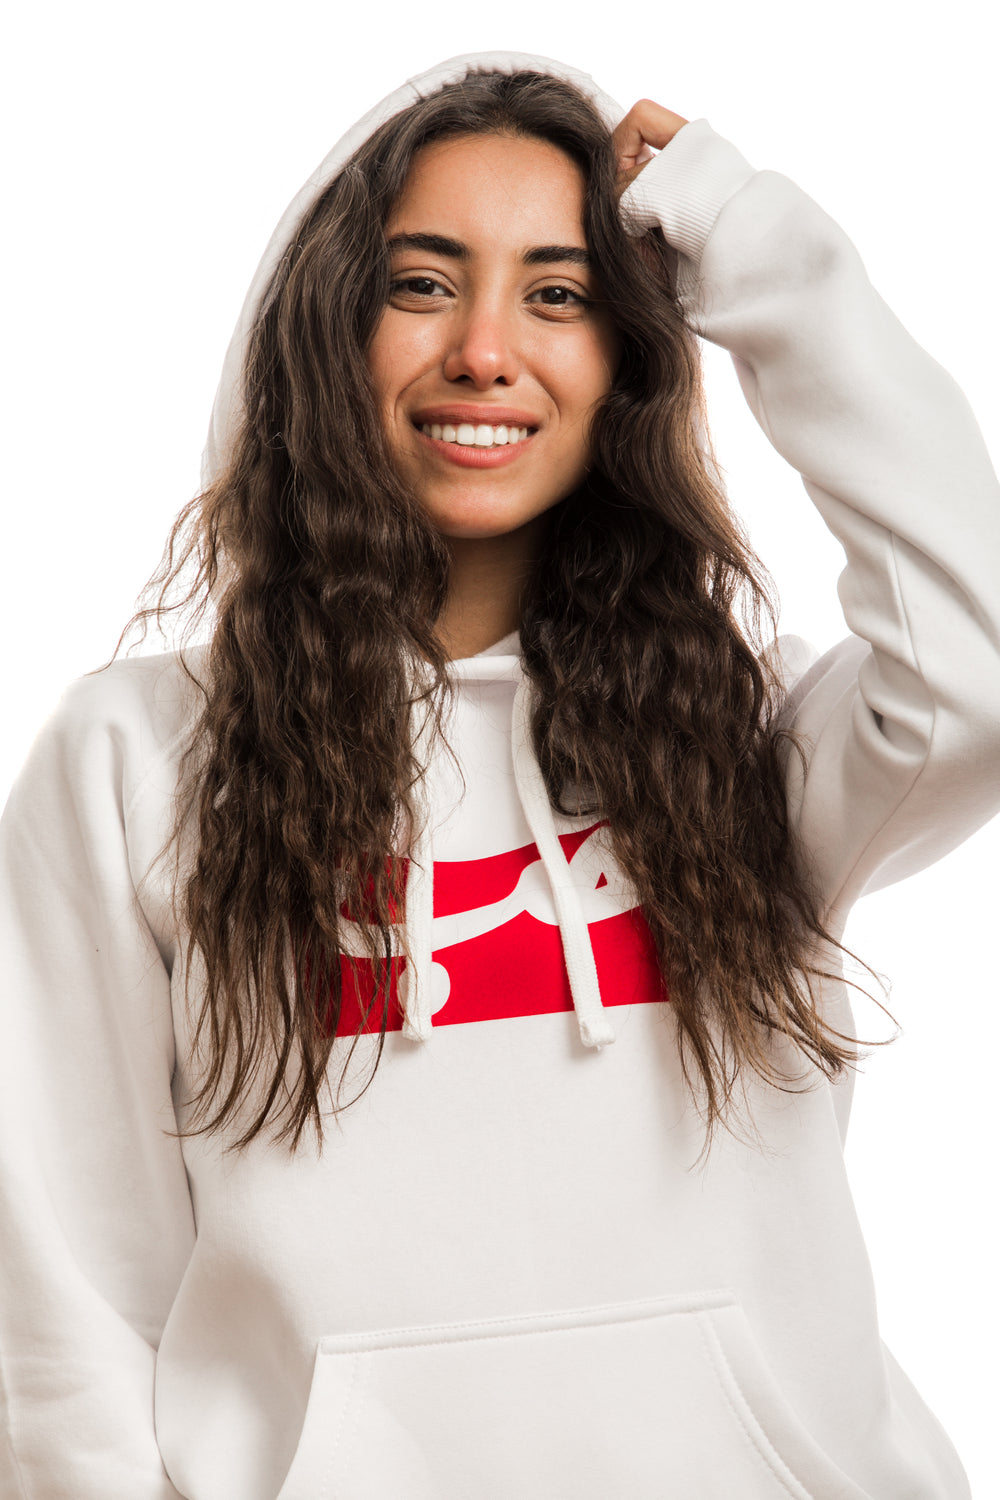 Young adult female wearing white Hoodie with Hobb written in Arabic حب in white and printed in a red velvet frame in the center of the Hoodie.